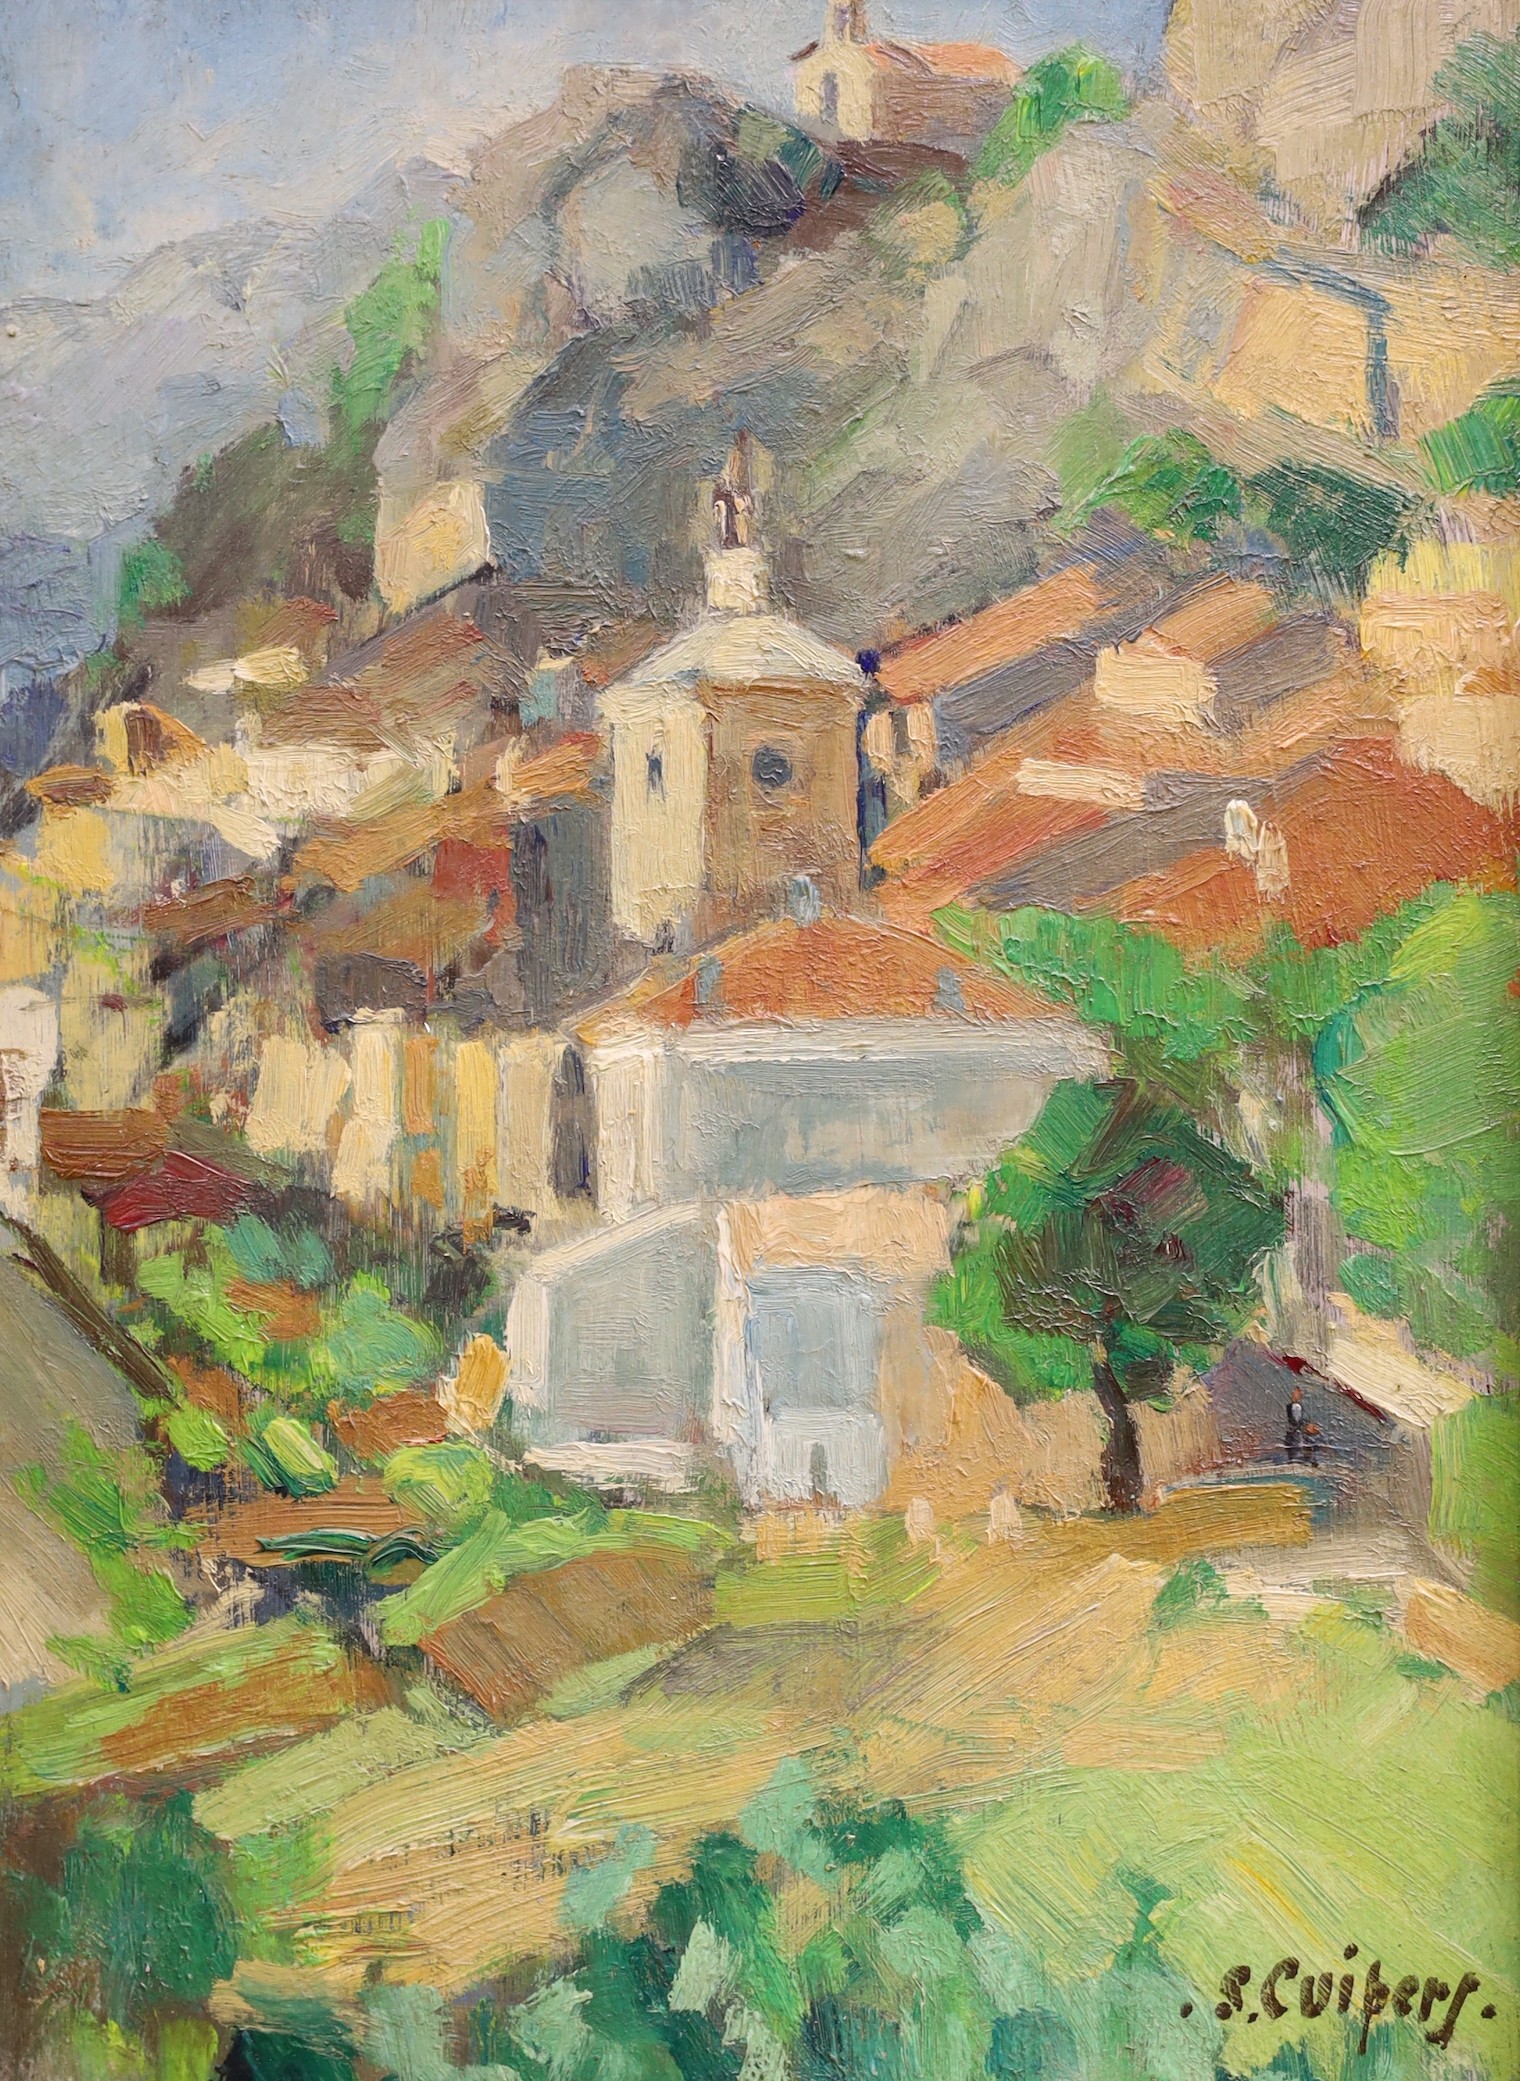 S. Cuipers, oil on board, 'Aiguines', signed, 30 x 22cm